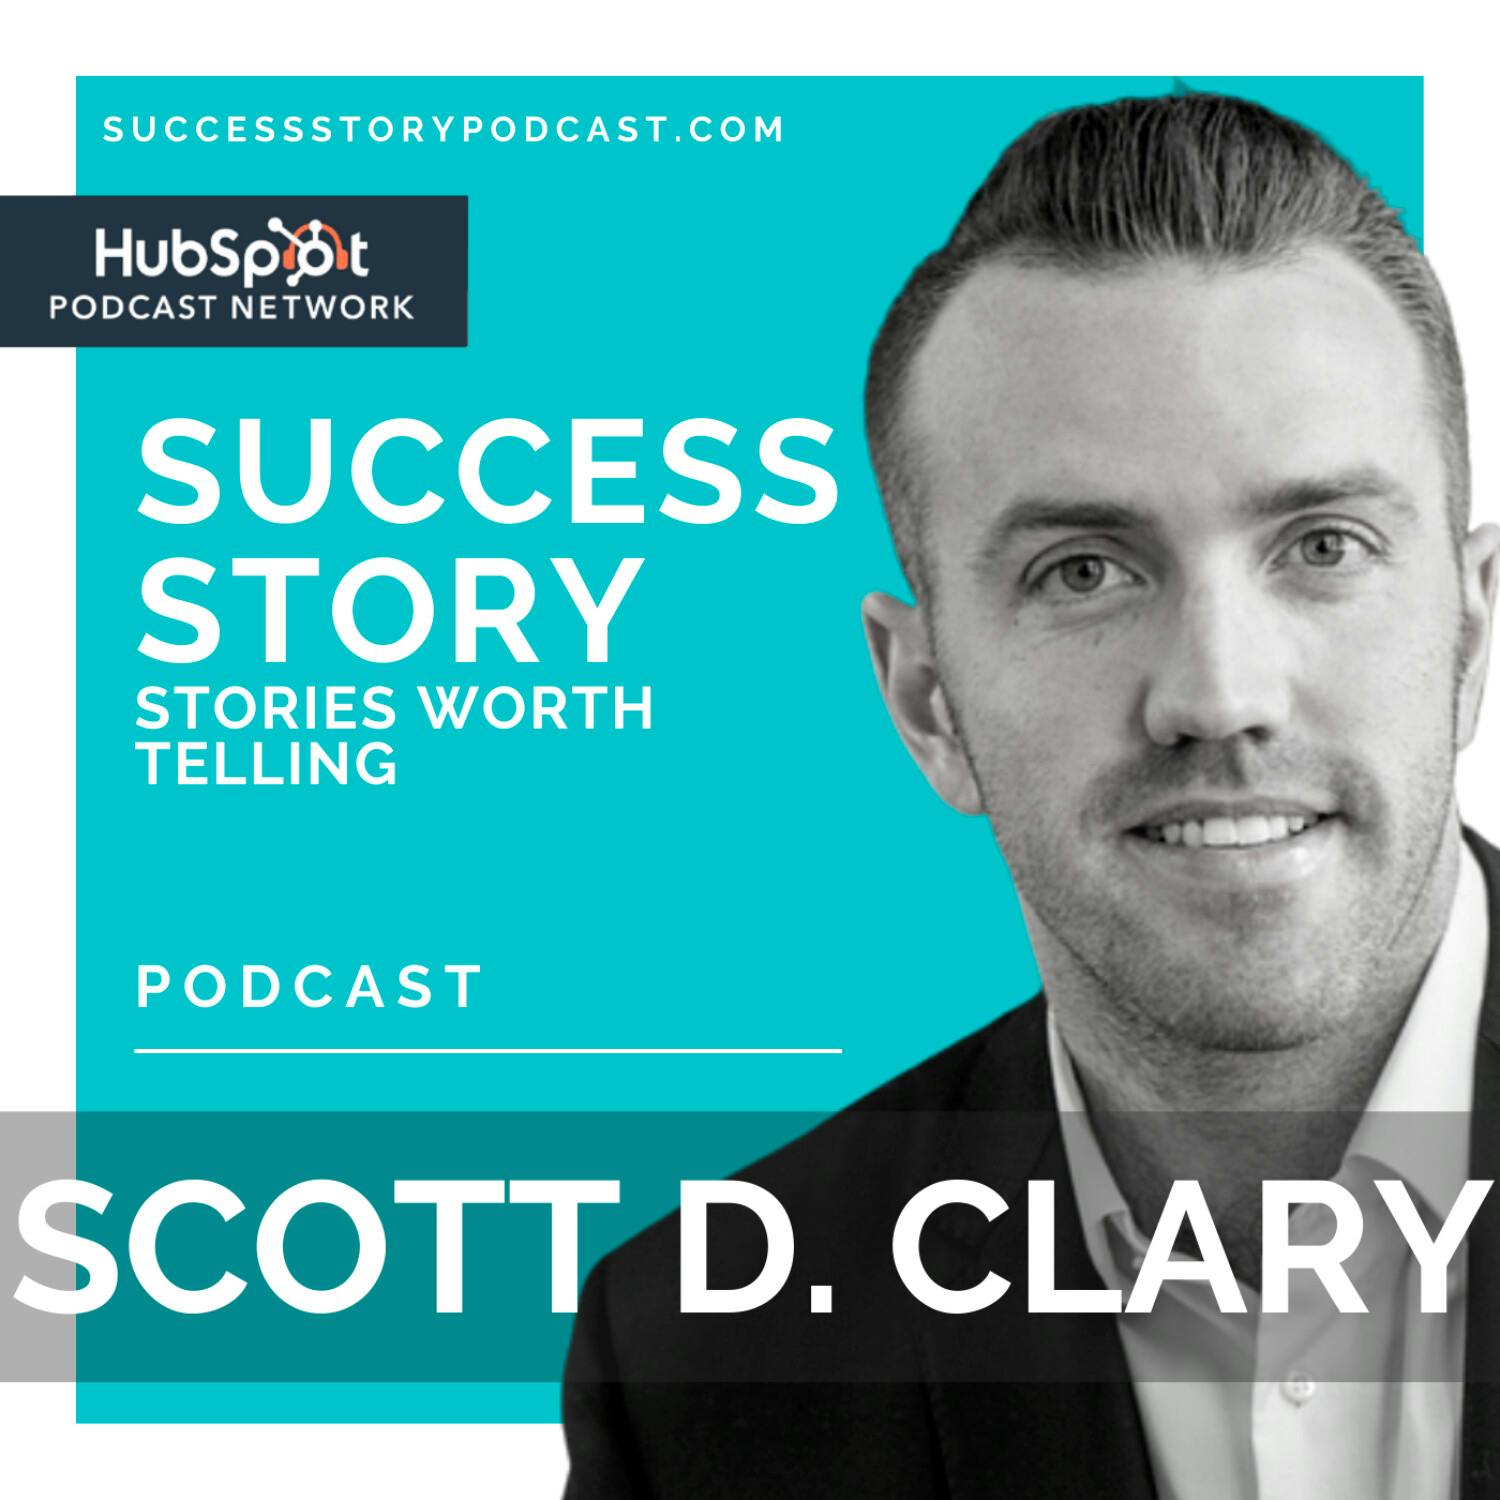 How Clubhouse Drove Sign-ups & Engagement VIA Exclusivity ($1B in 8 Months) #scottsthoughts